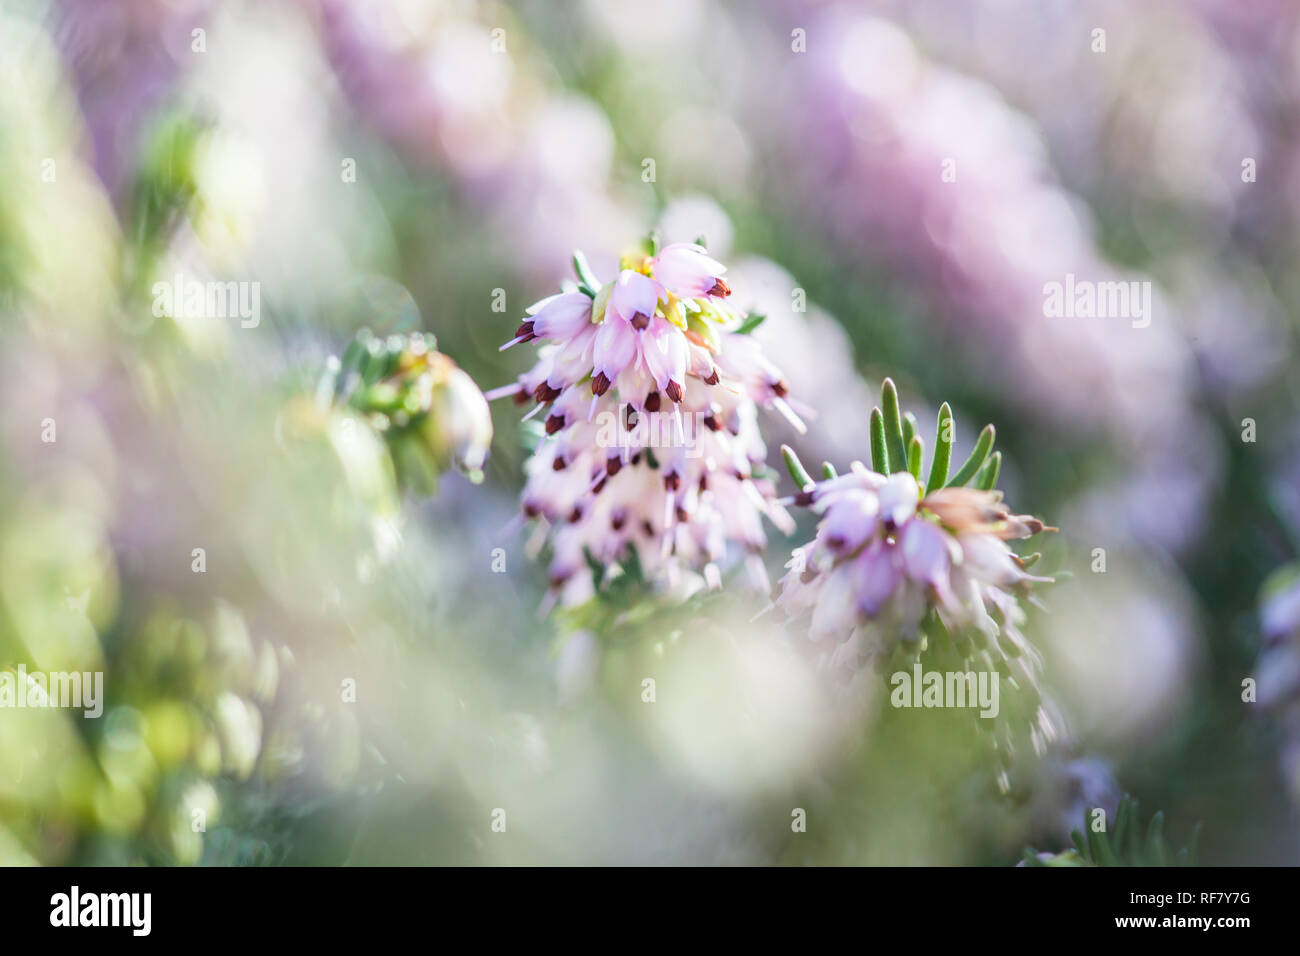 Delicate rose-pink flowers of Erica darleyensis plant (Winter Heath) isolated in close-up macro shot Stock Photo